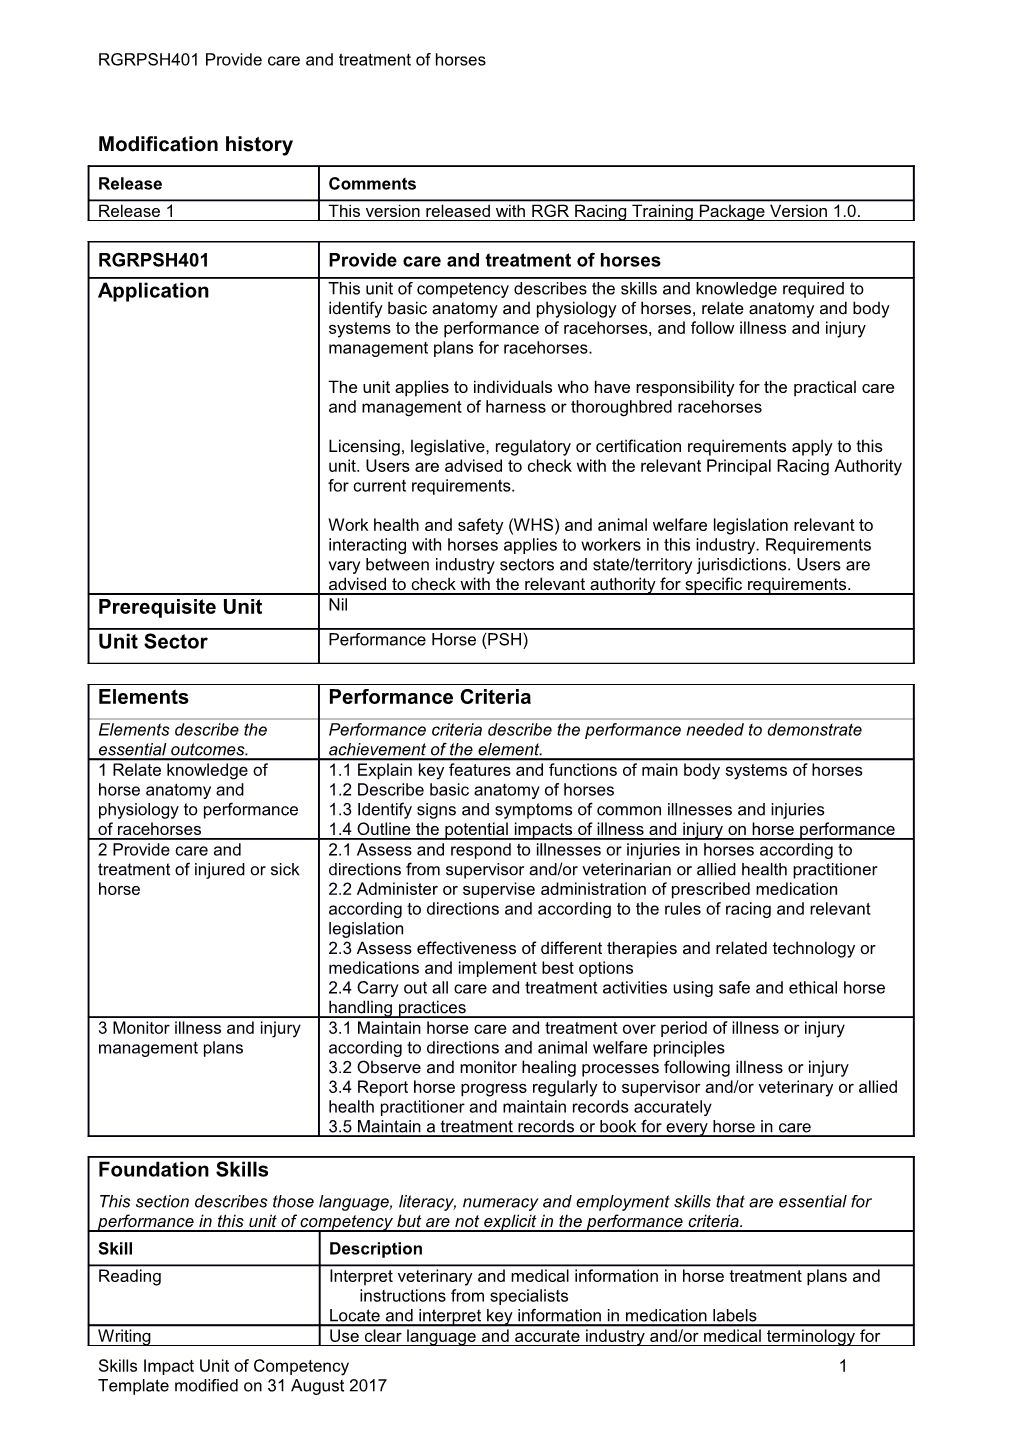 Skills Impact Unit of Competency Template